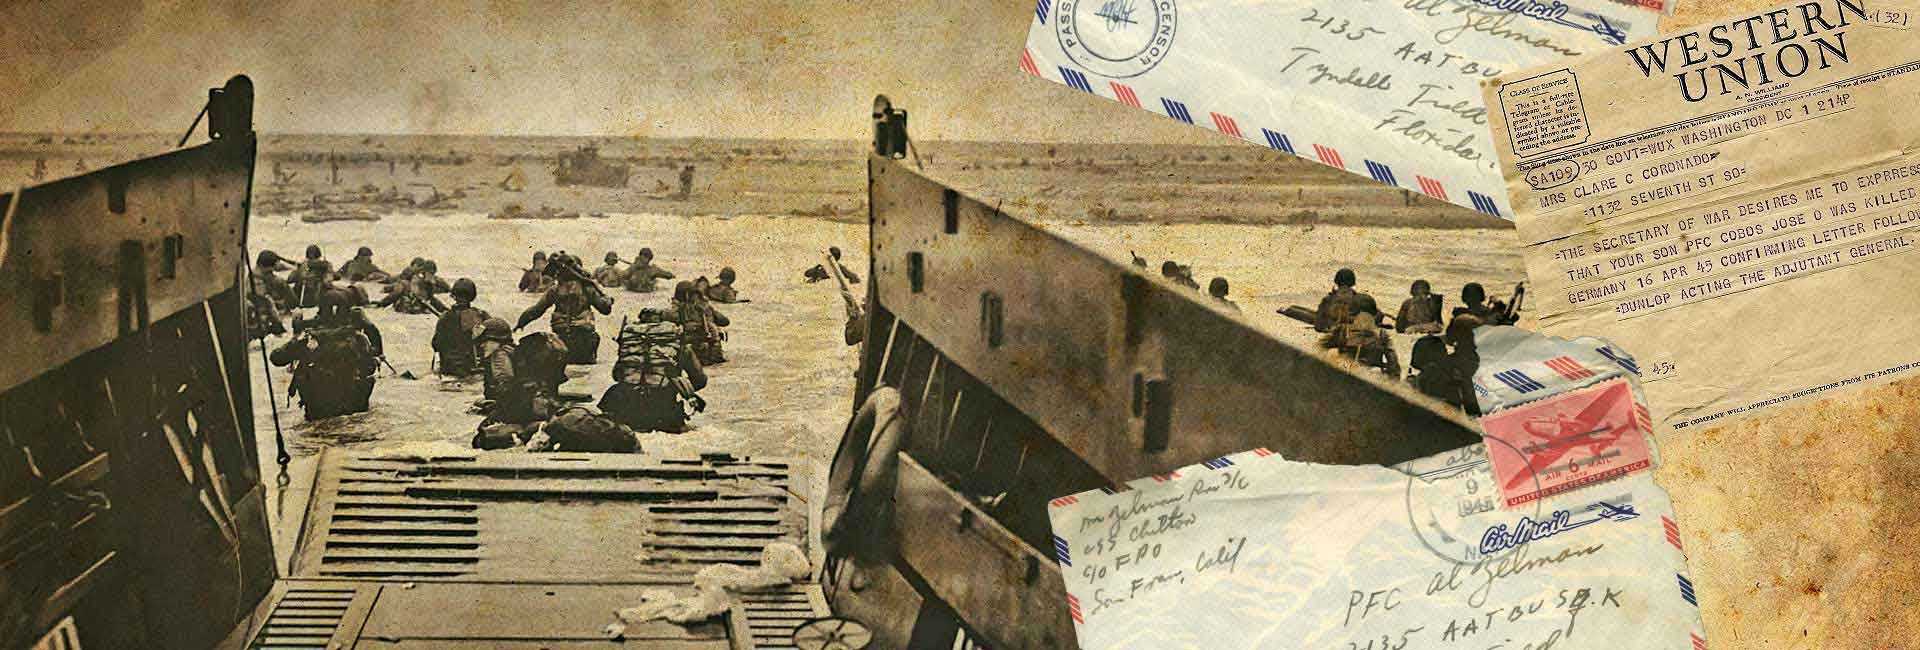 Stories from the beaches of Normandy in 1944 to Berlin Germany 